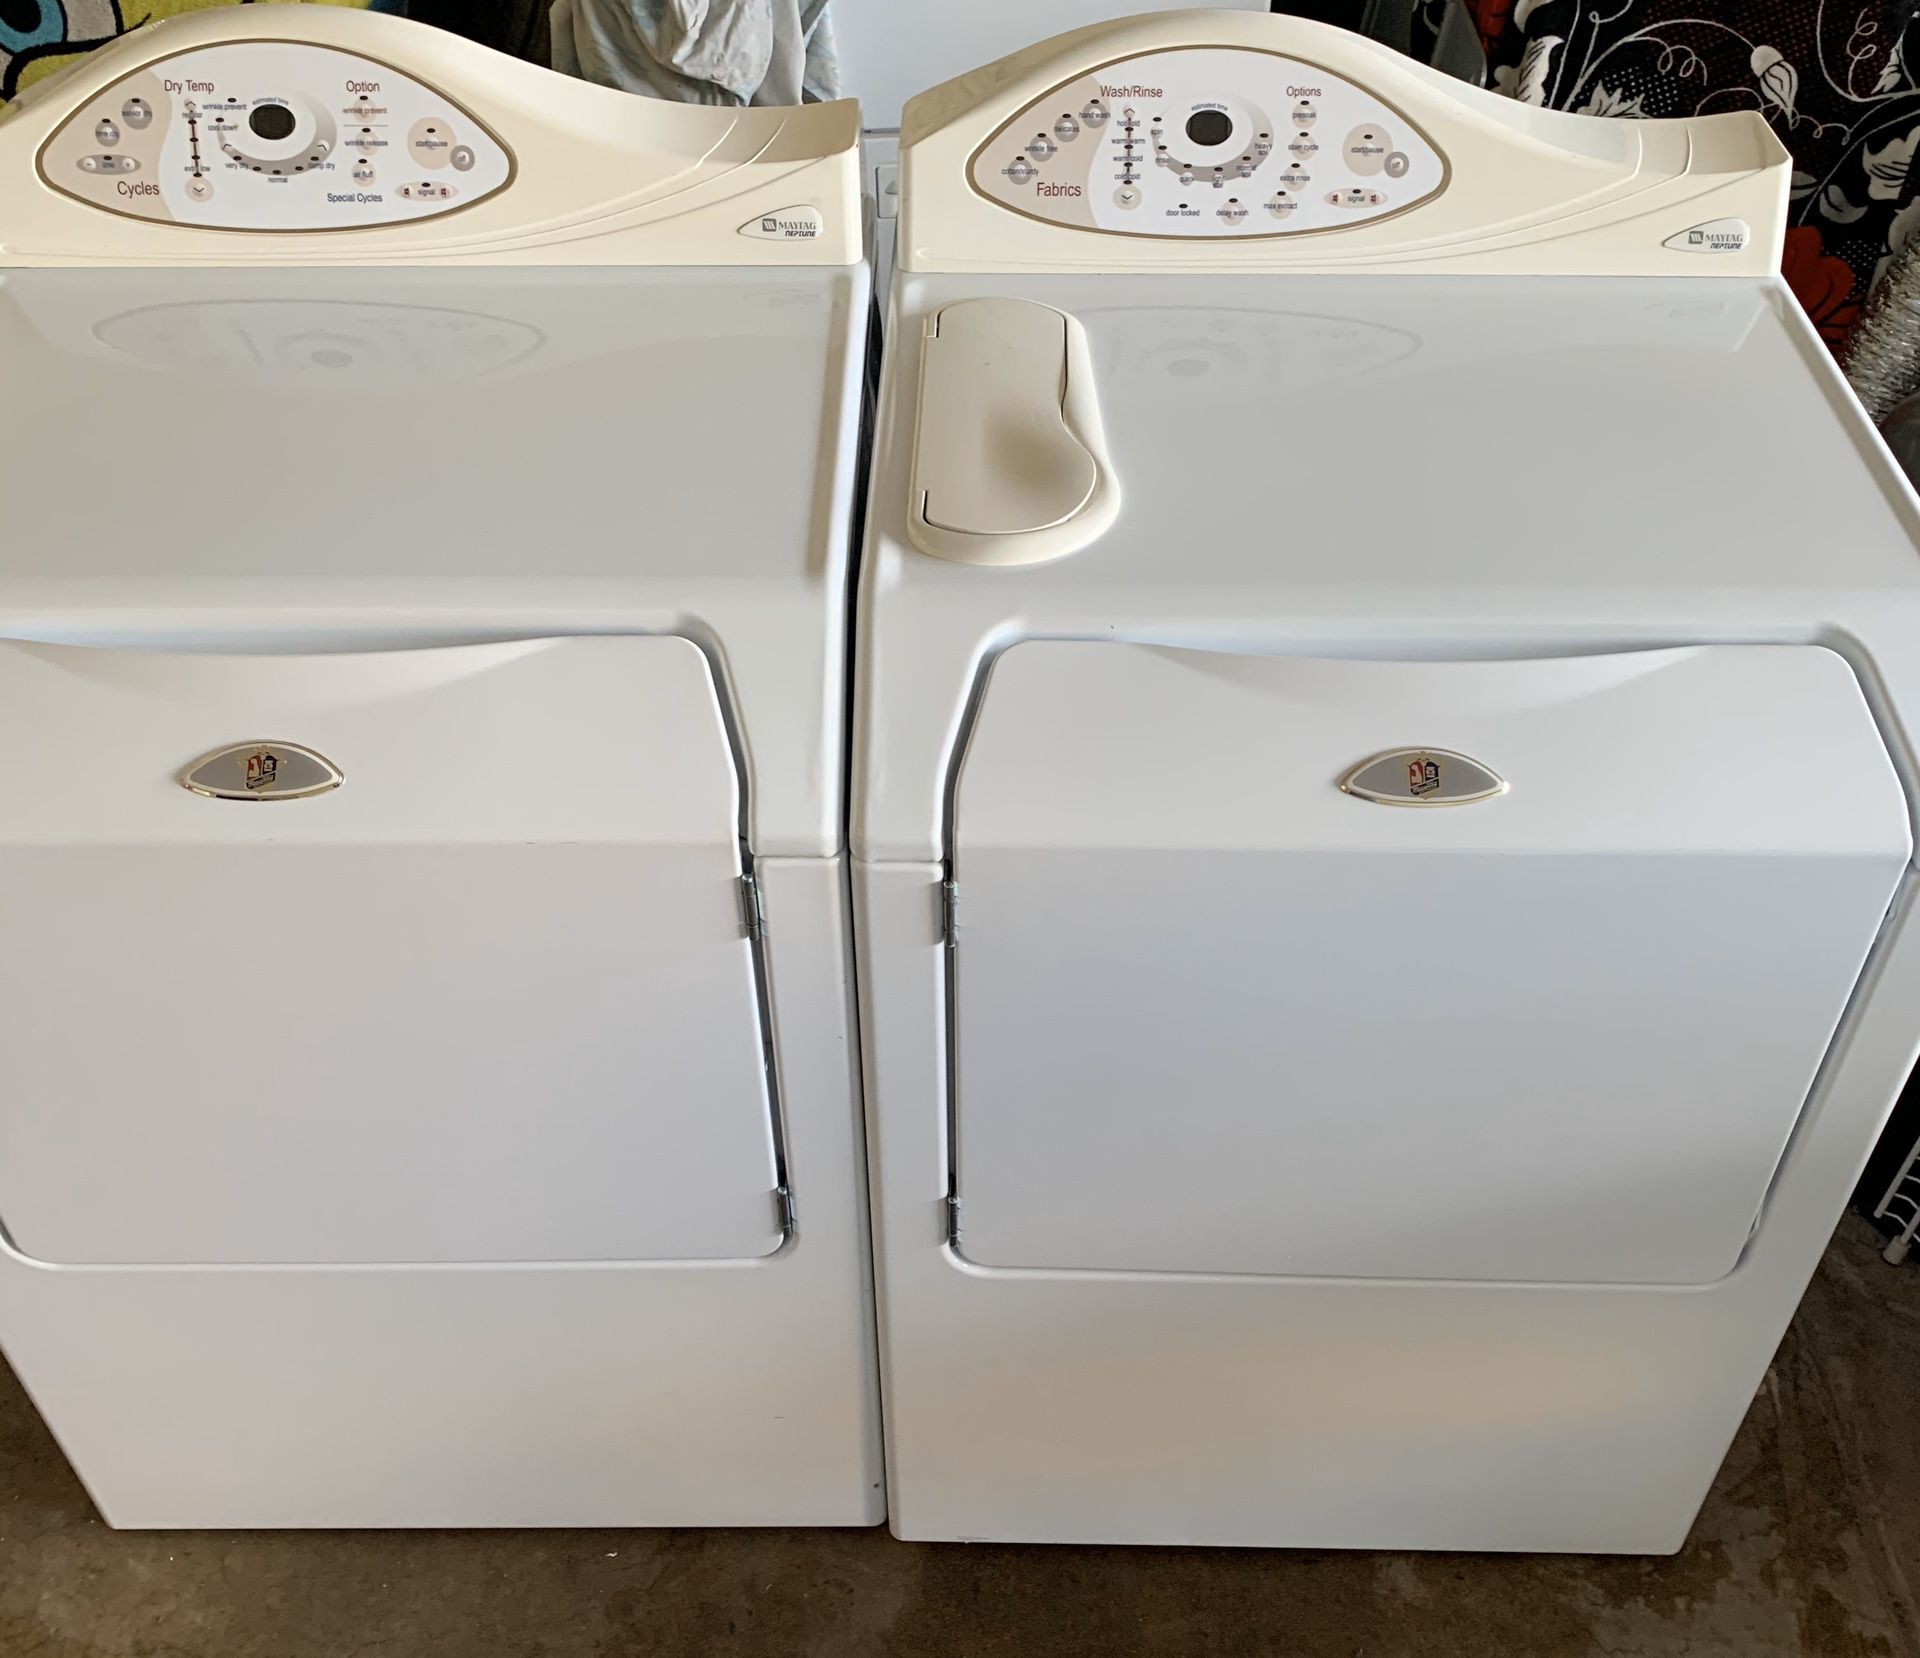 Washer machine and dryer electric set two months warranty delivery and installation free